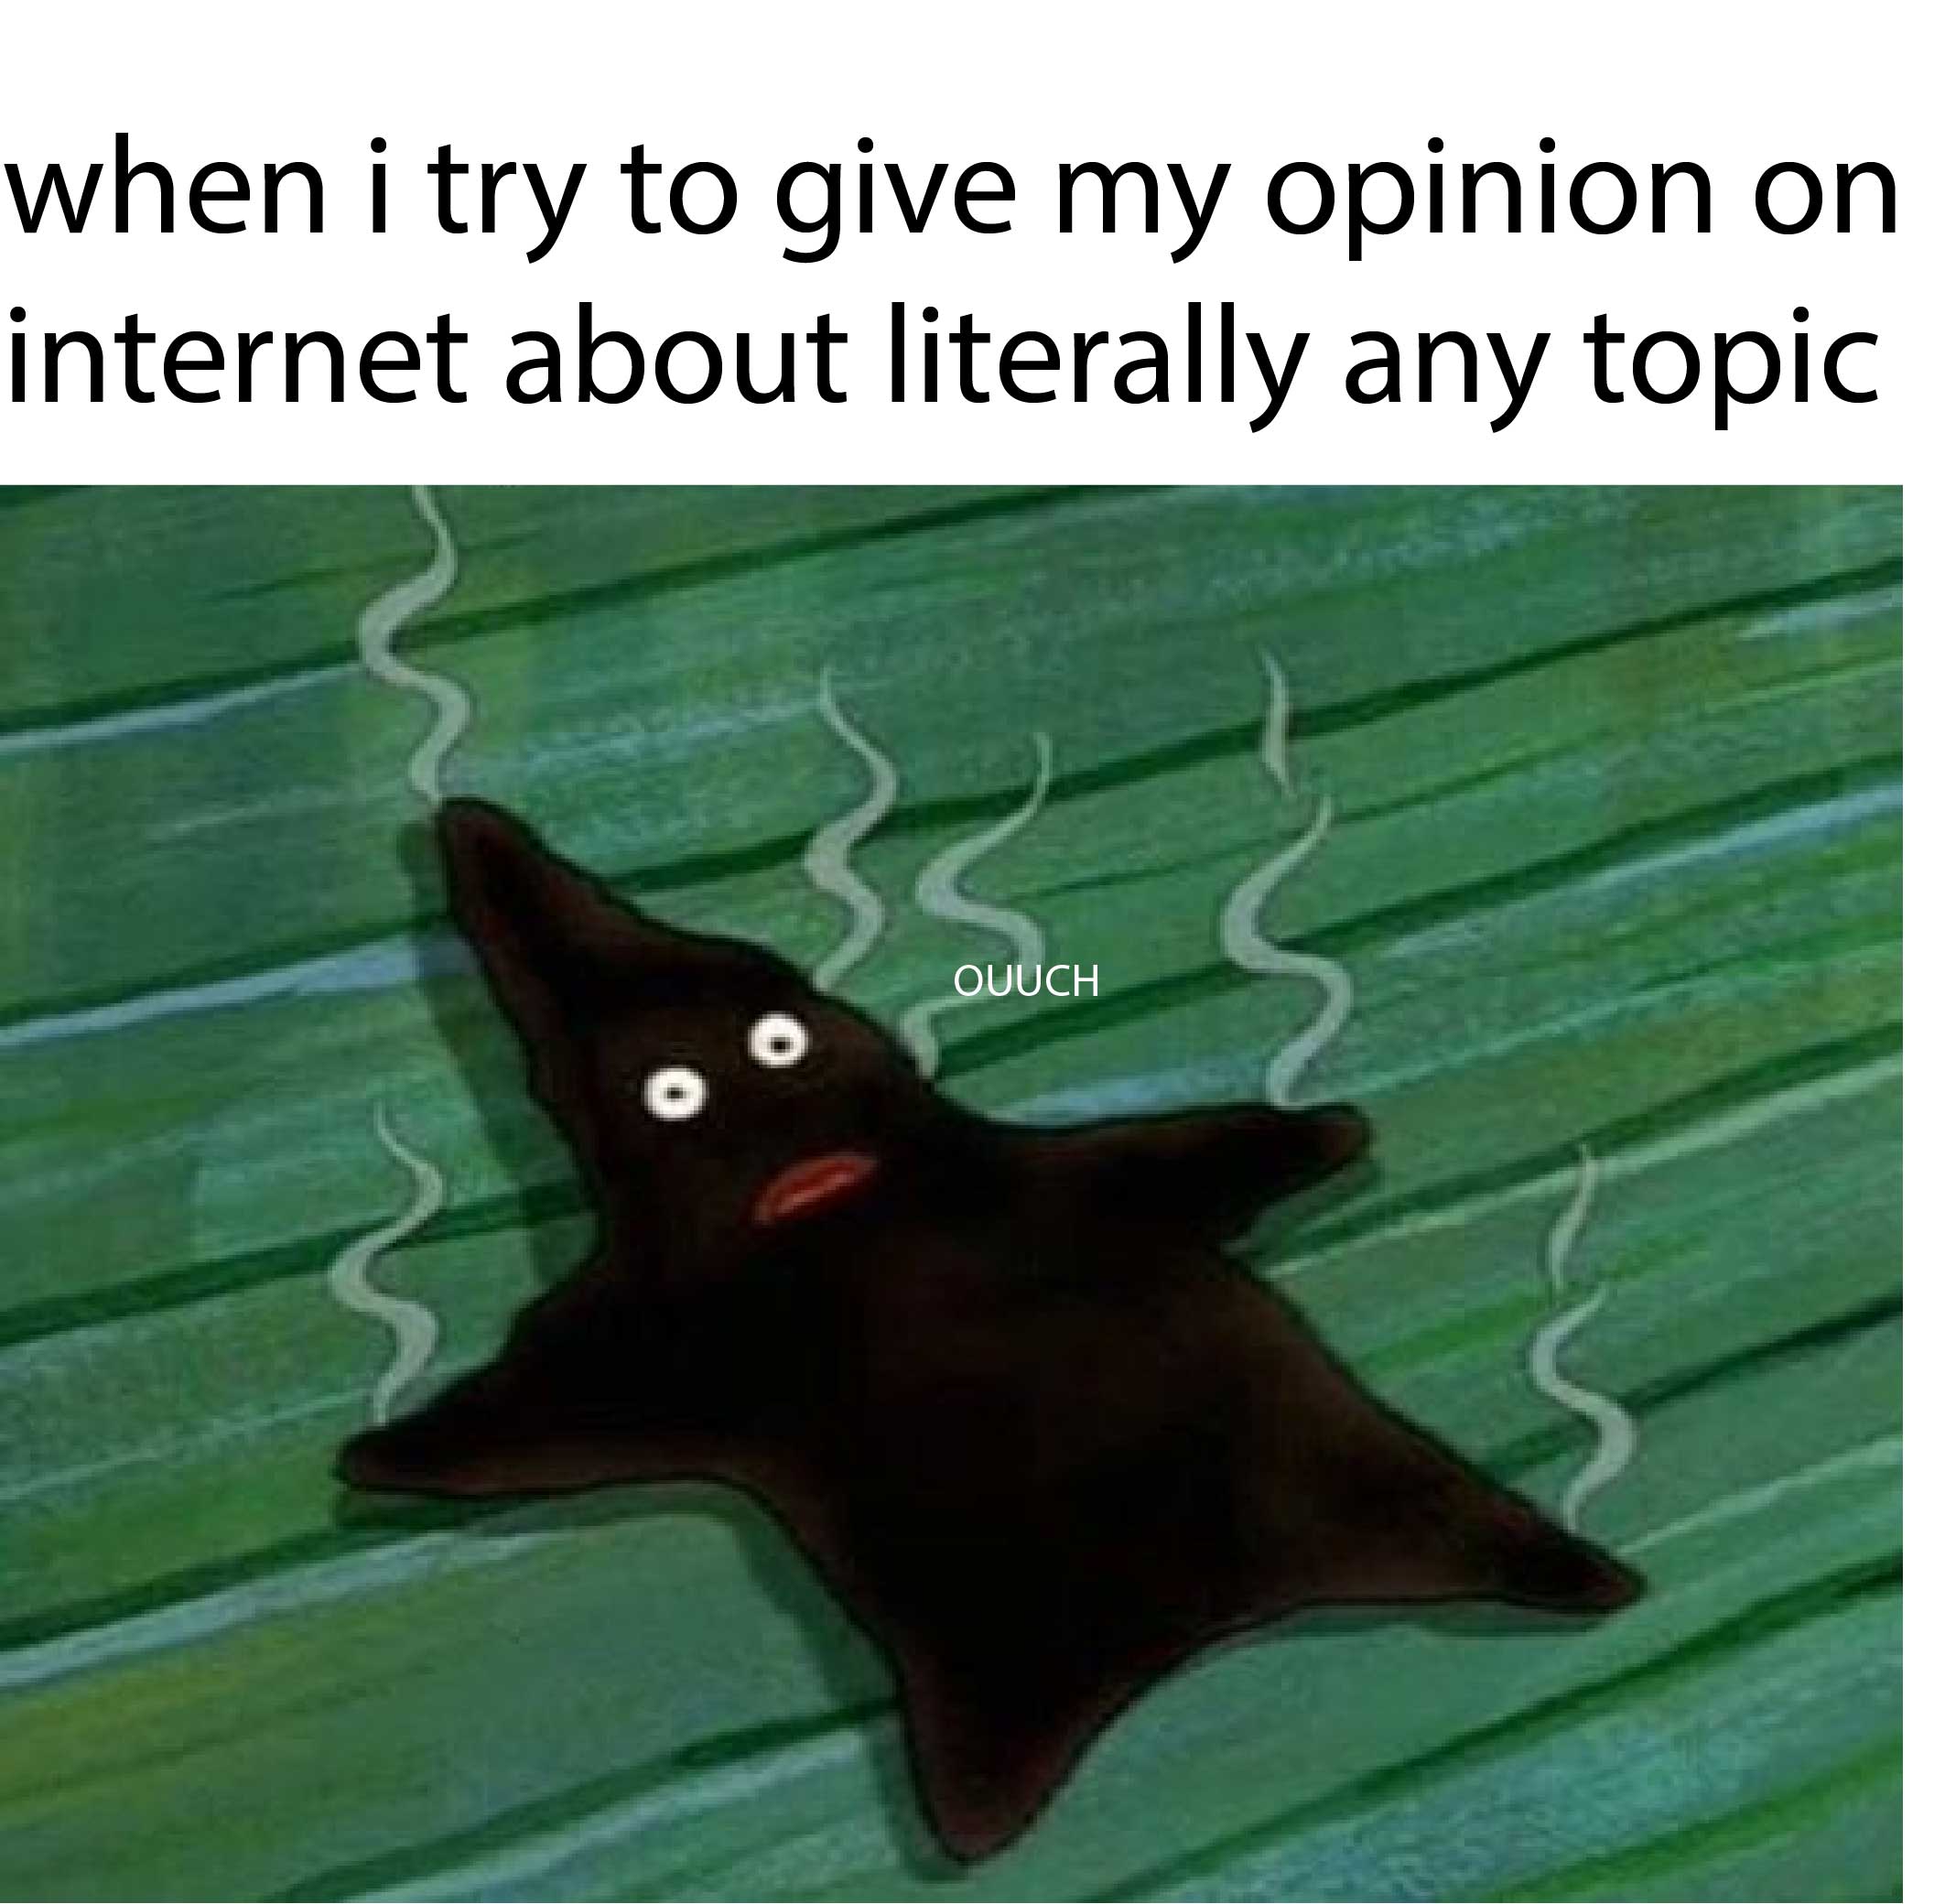 spongebob spongebob-memes spongebob text: when i try to give my opinion on internet about literally any topic CH 